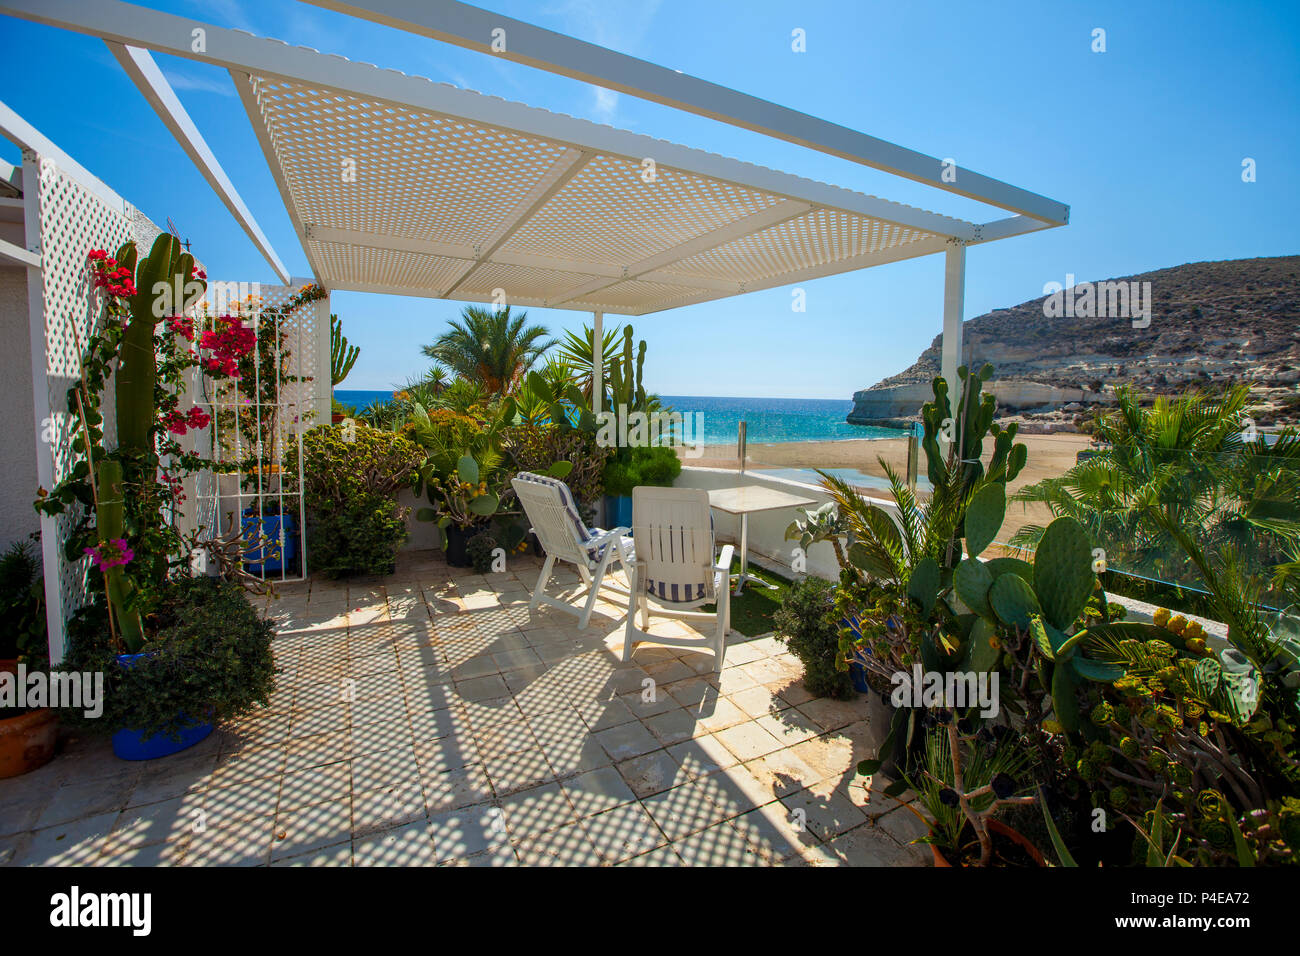 View on a Spanish beach from a roof garden Stock Photo